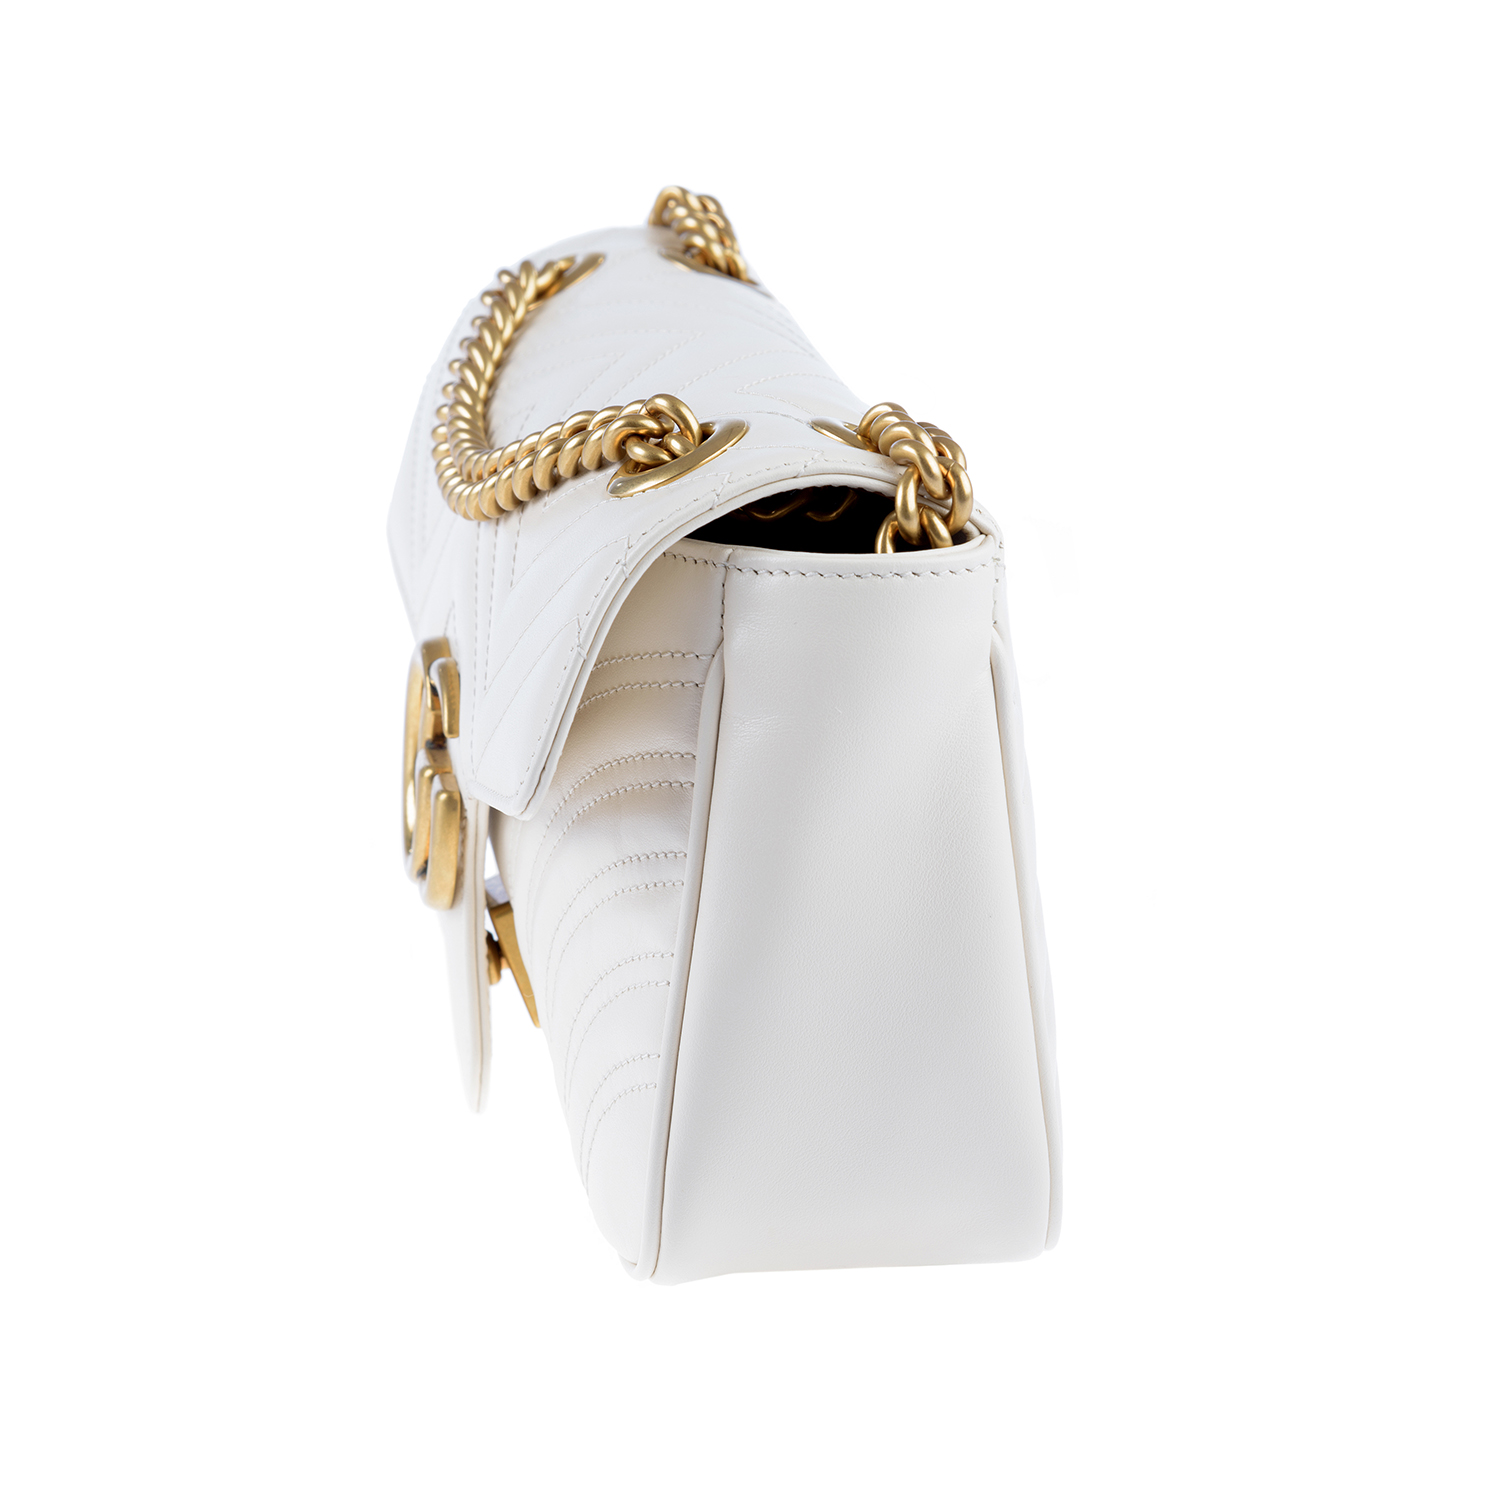 GG Marmont Small Matelasse Shoulder Bag  Rent Gucci Bags » Luxury Fashion  Rentals